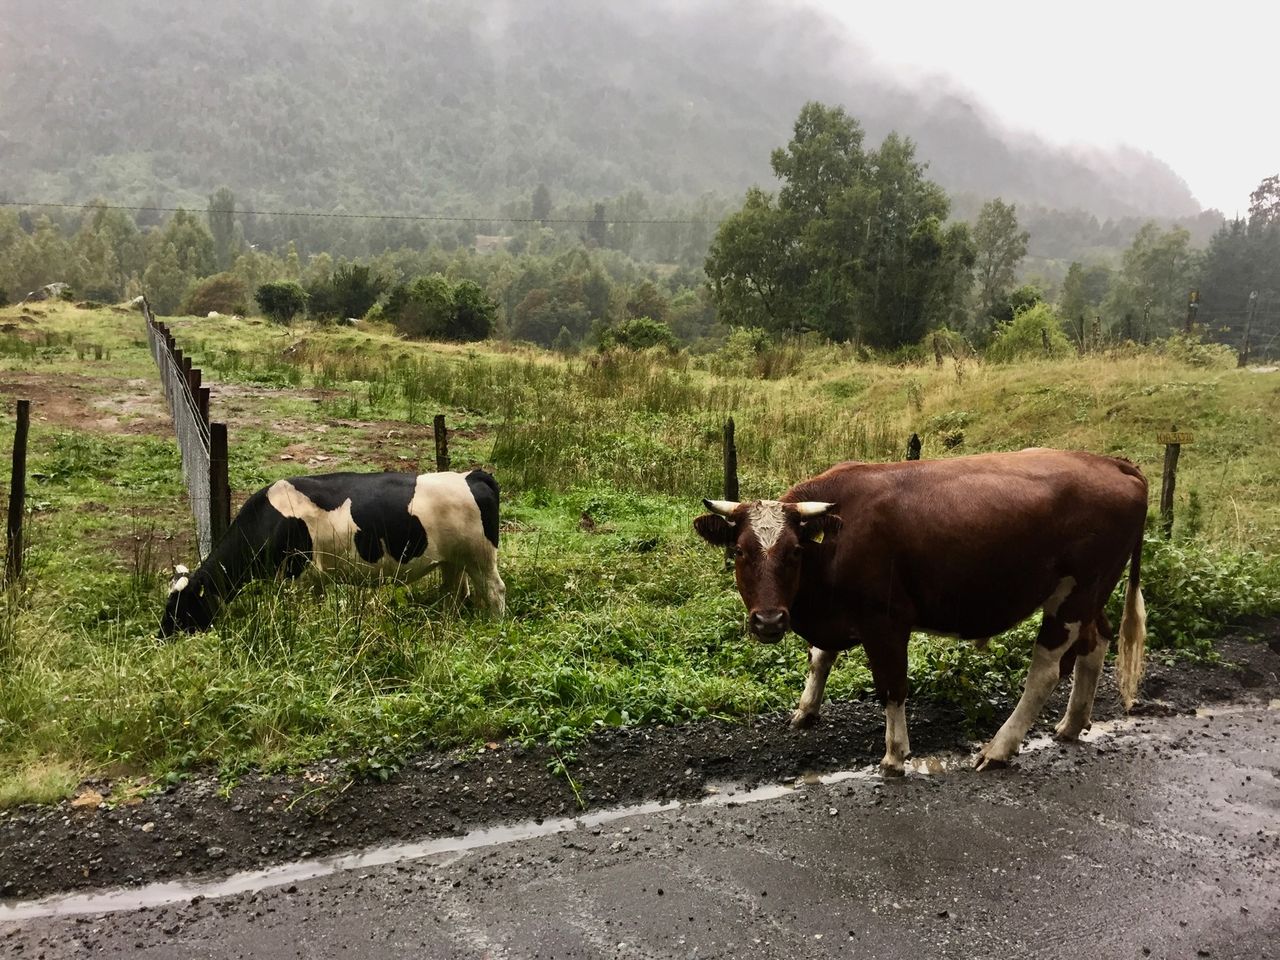 Two more cows.